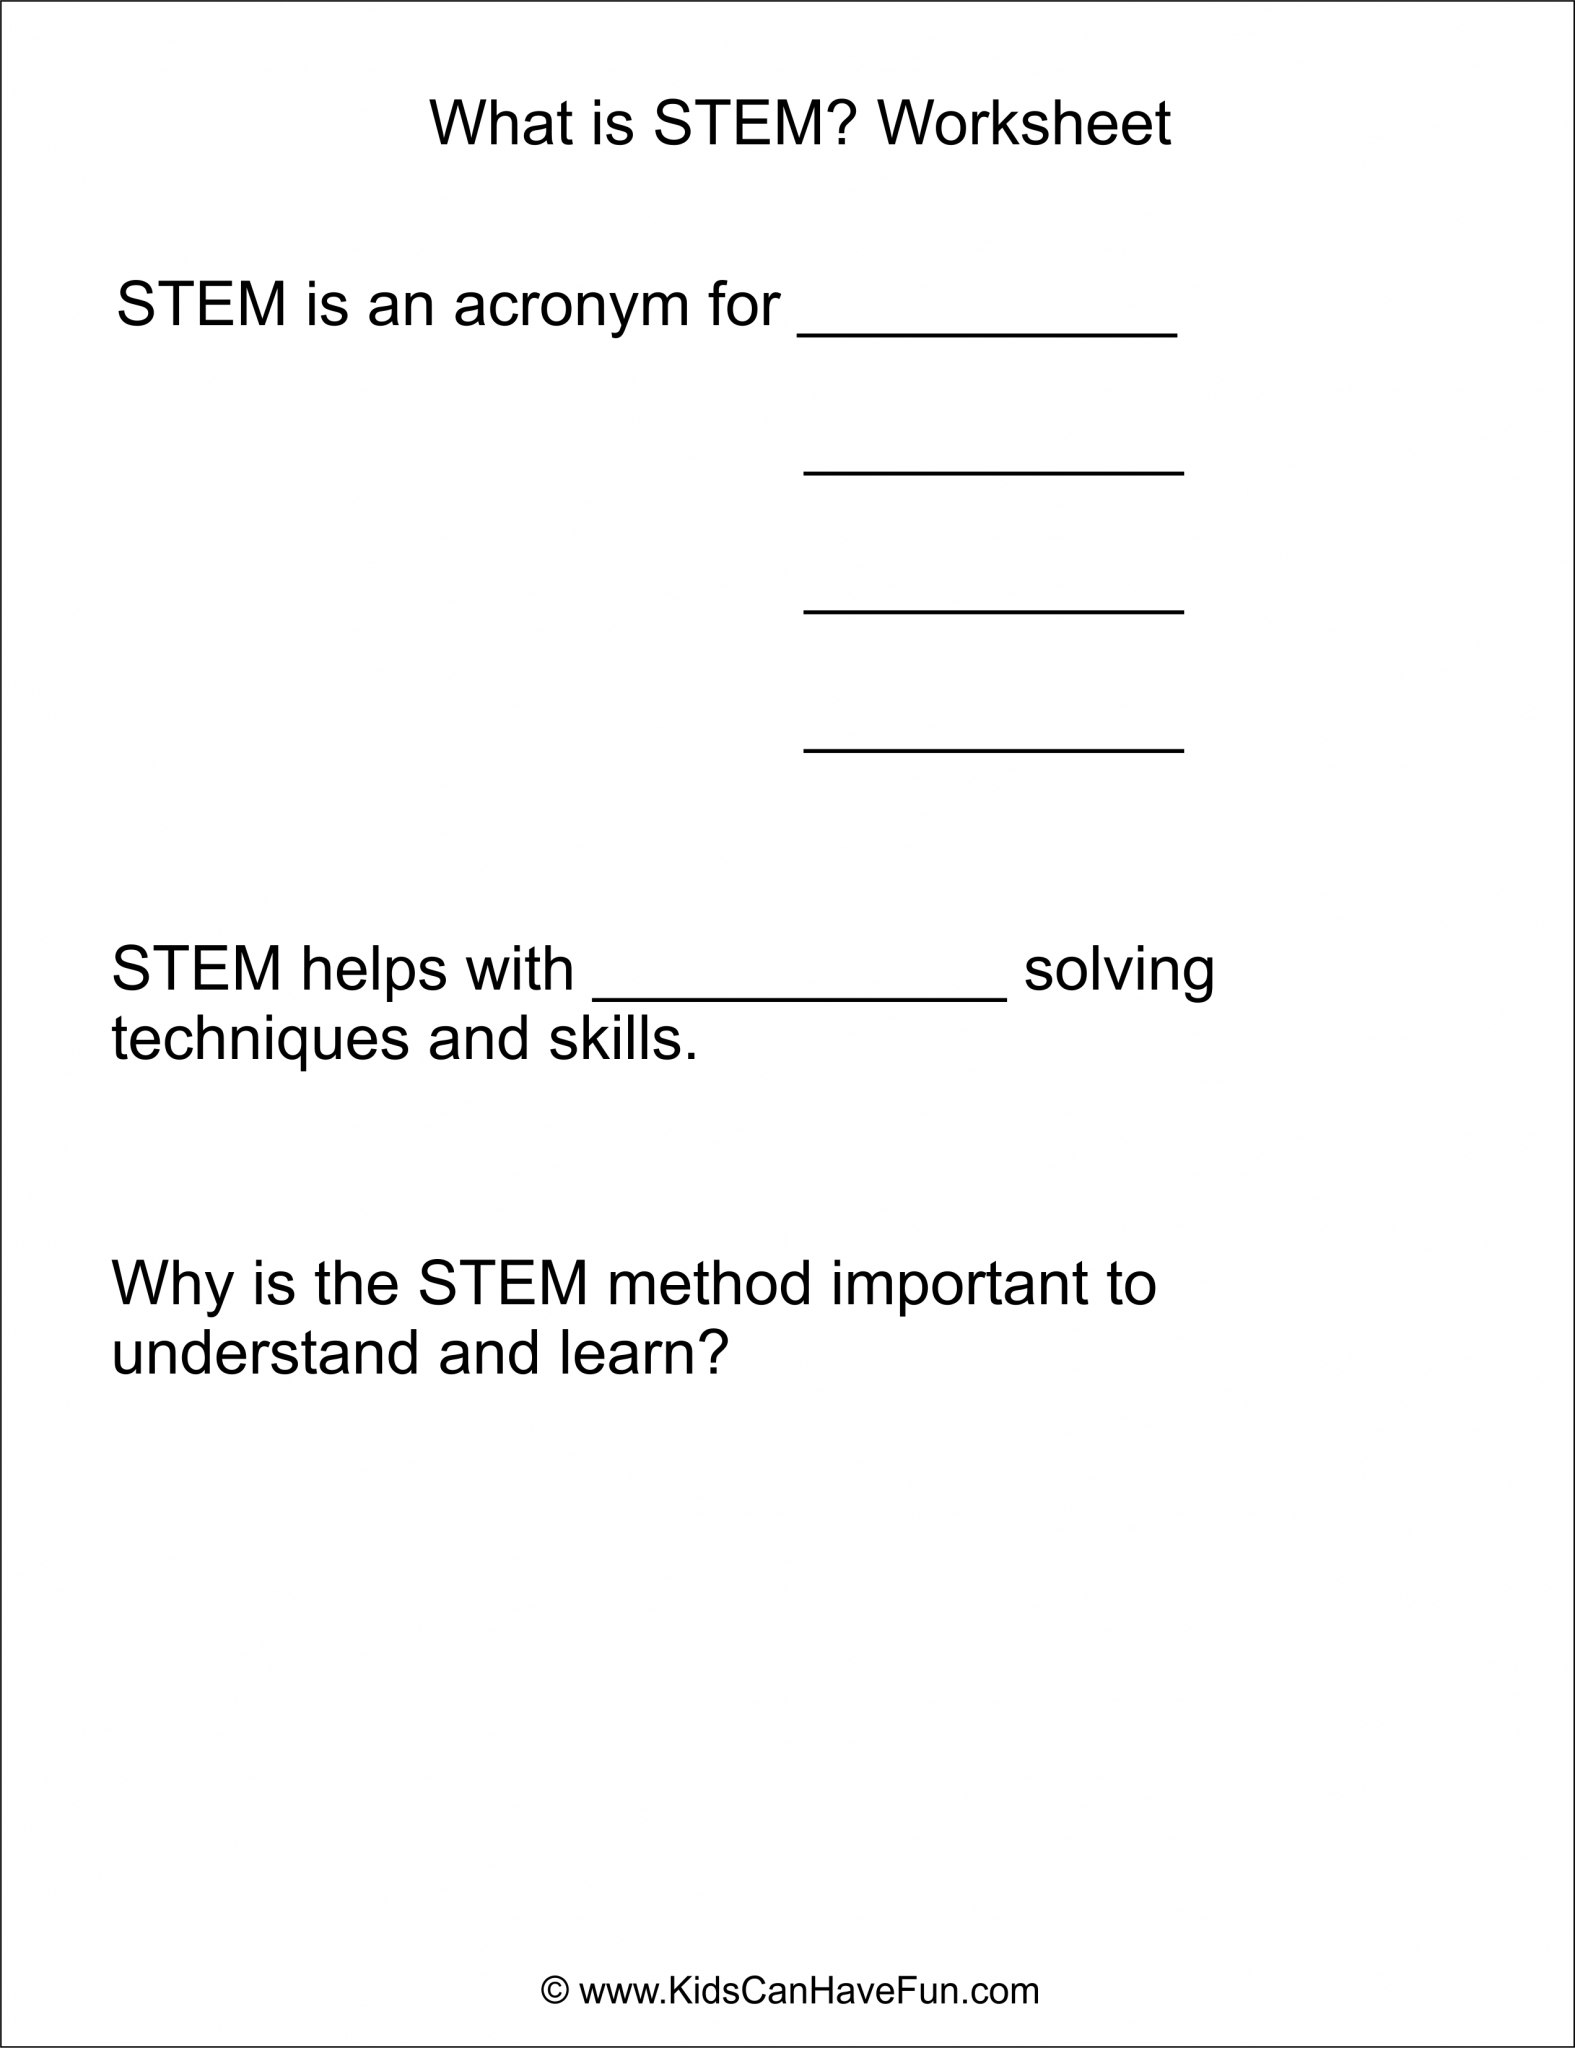 worksheets-archives-kidscanhavefun-blog-play-explore-and-learn